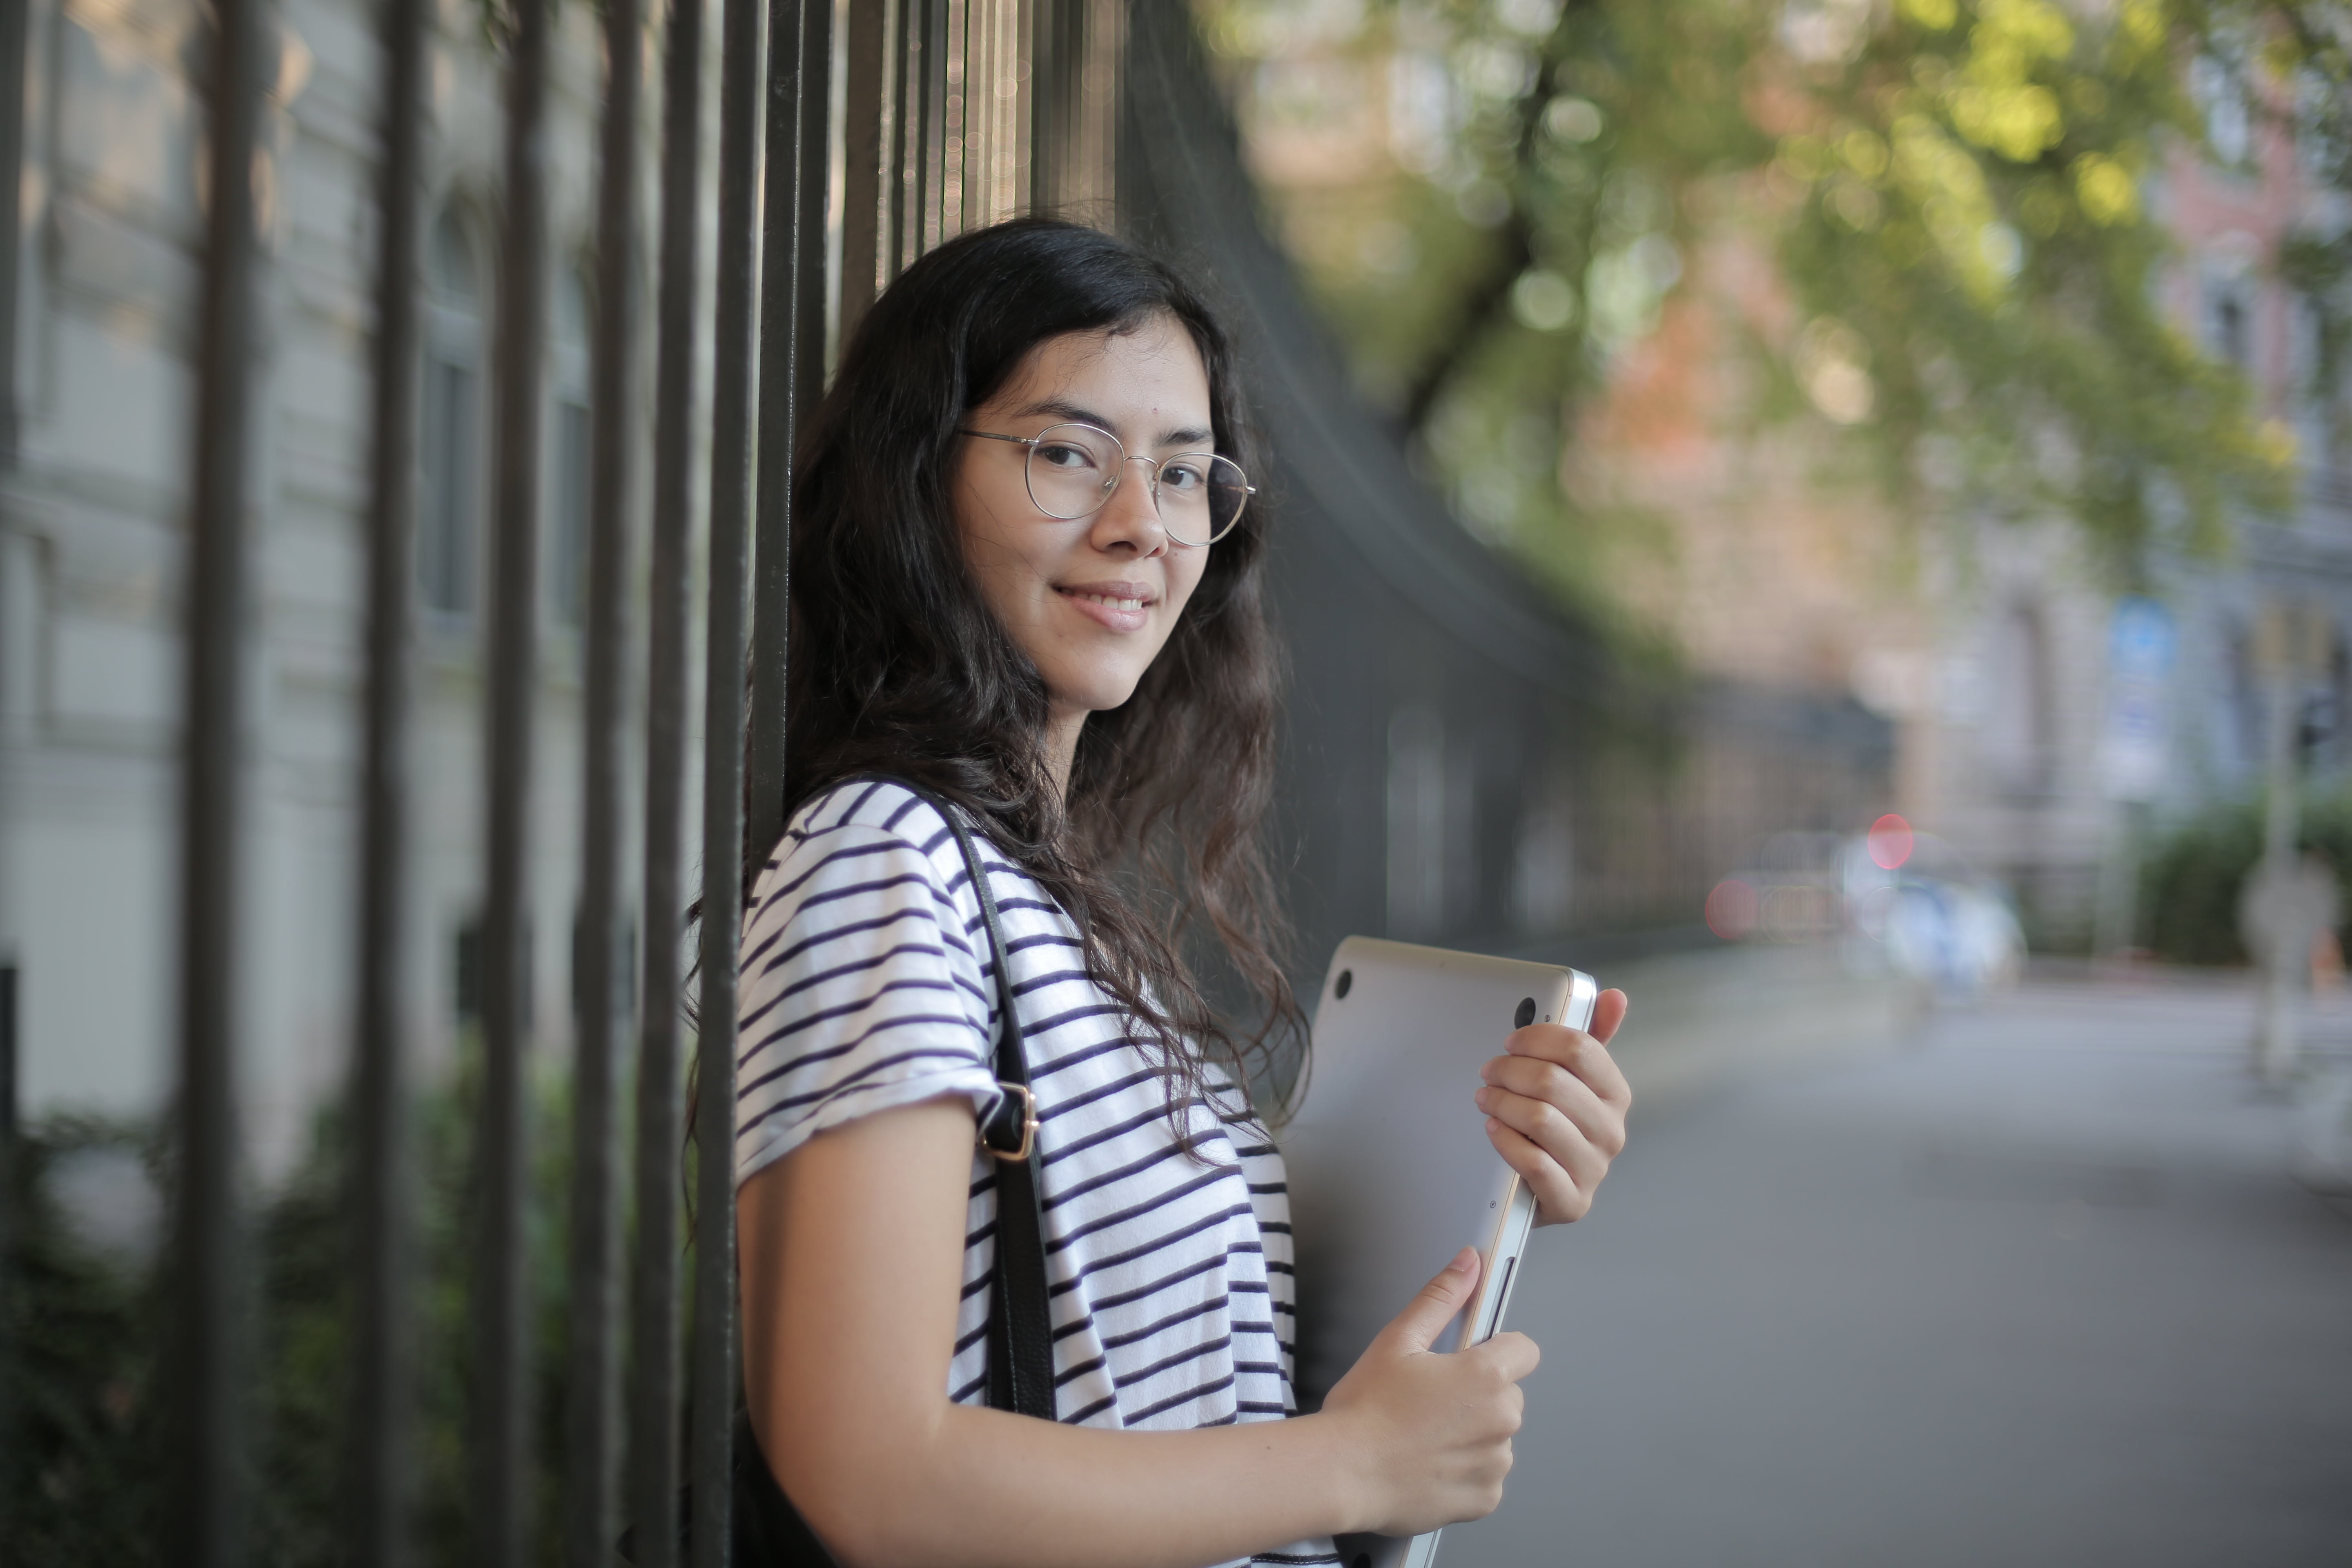 Photo by Andrea Piacquadio: https://www.pexels.com/photo/woman-in-black-and-white-striped-shirt-holding-laptop-3808811/